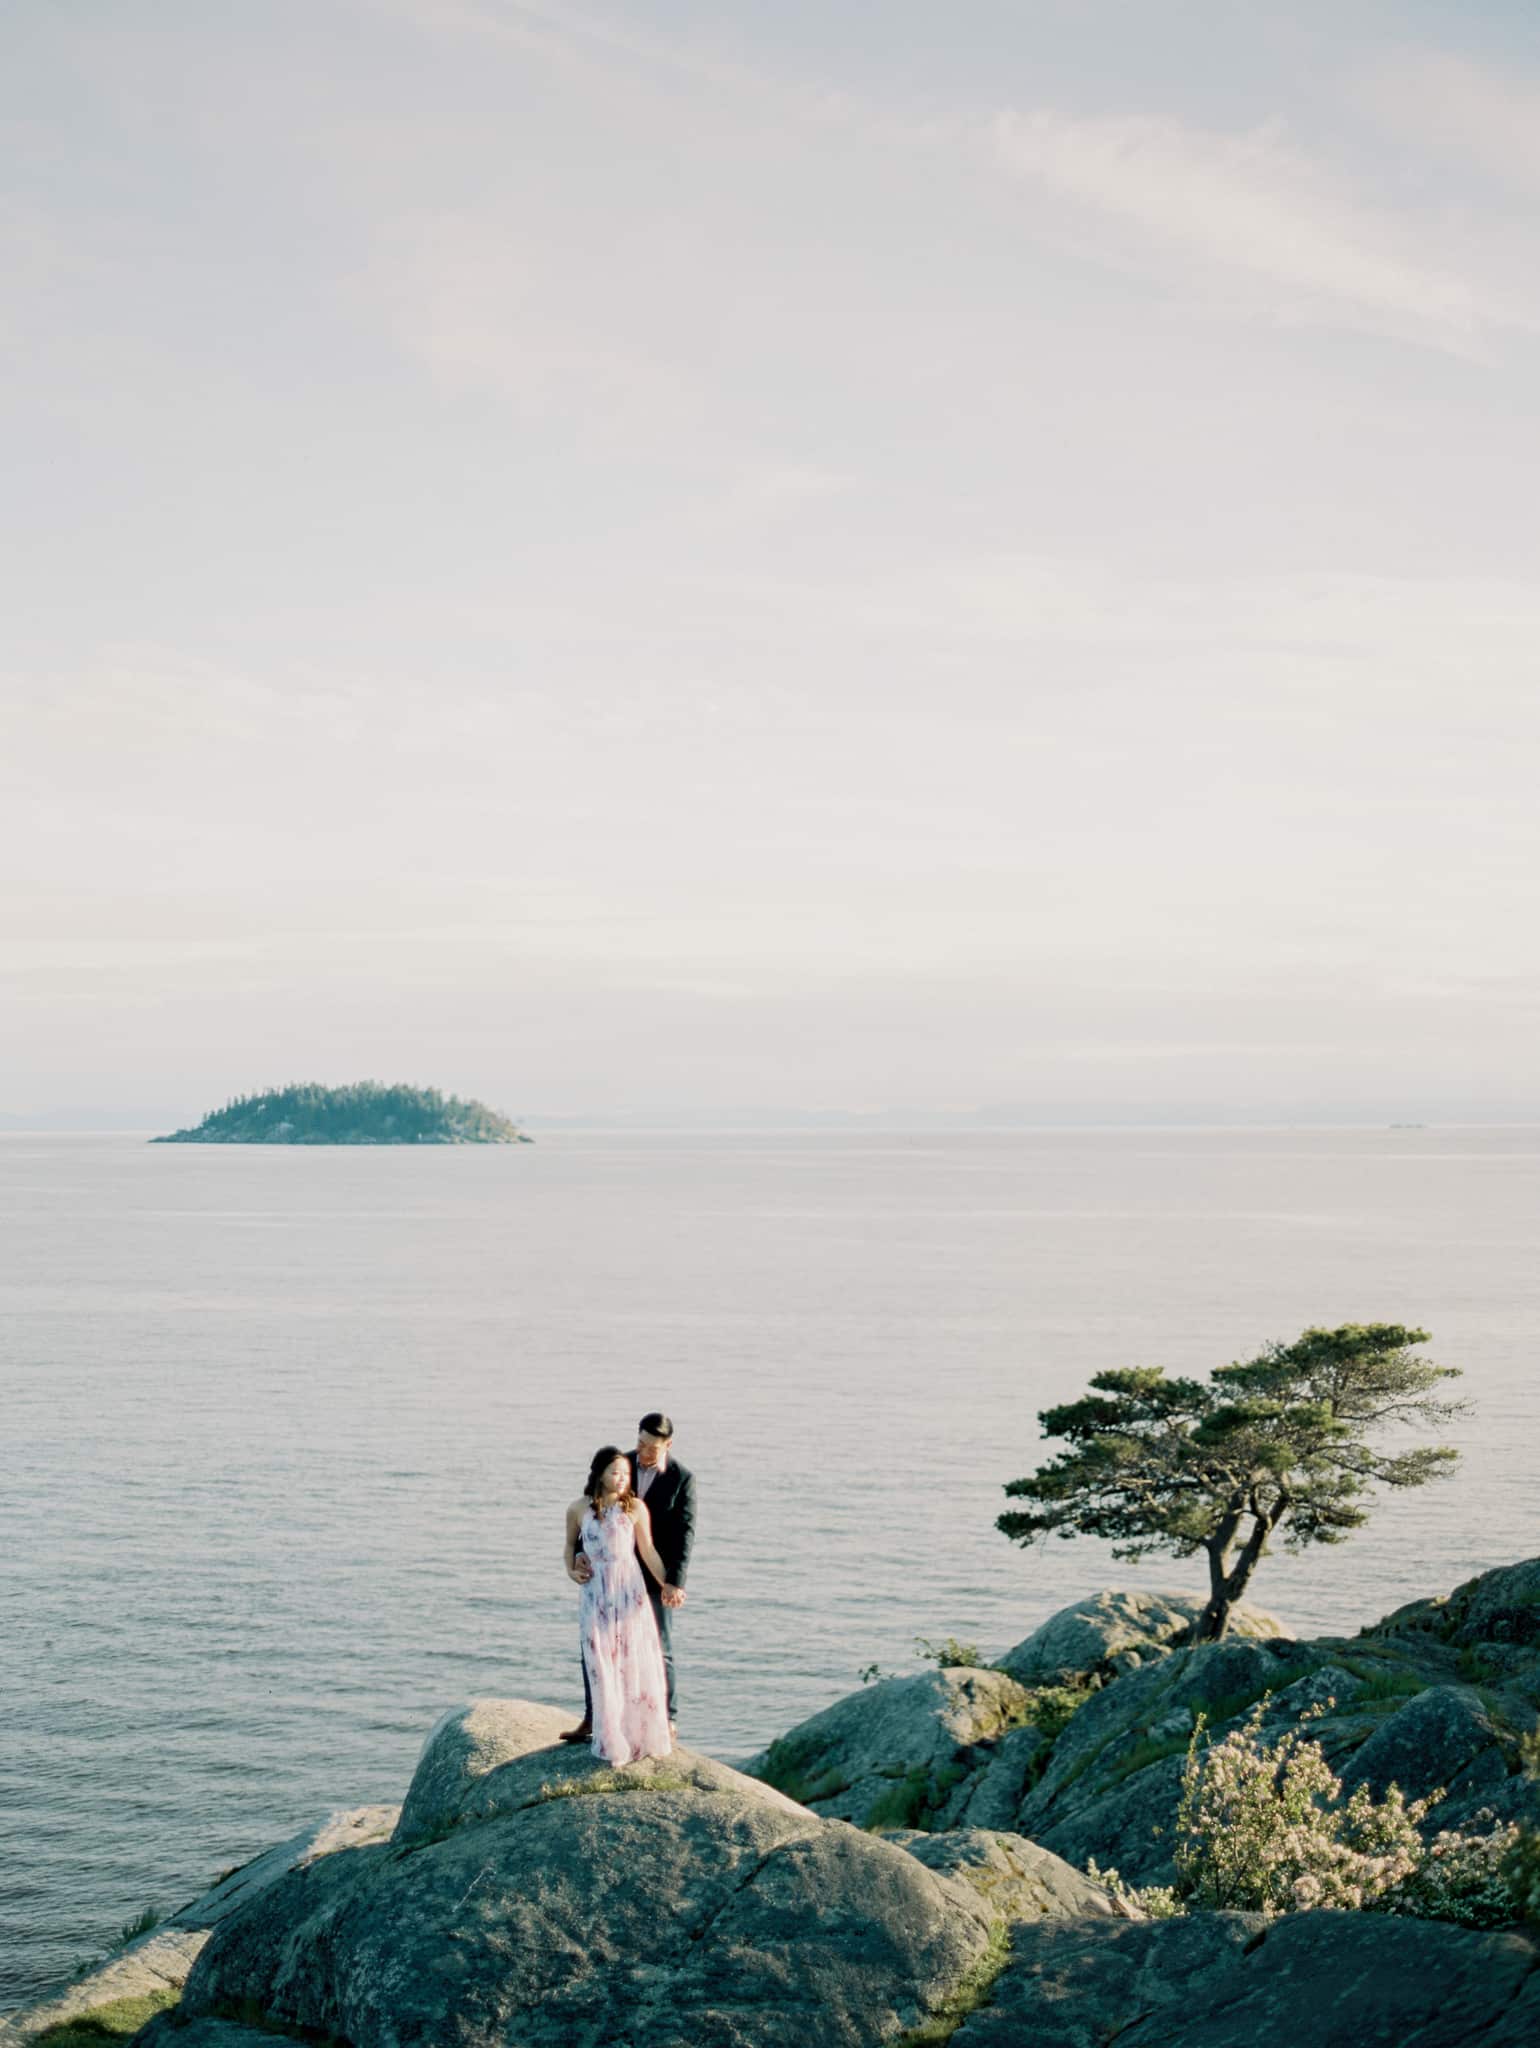 whytecliff-park-lighthouse-vancouver-engagement-prewedding-fineart-08